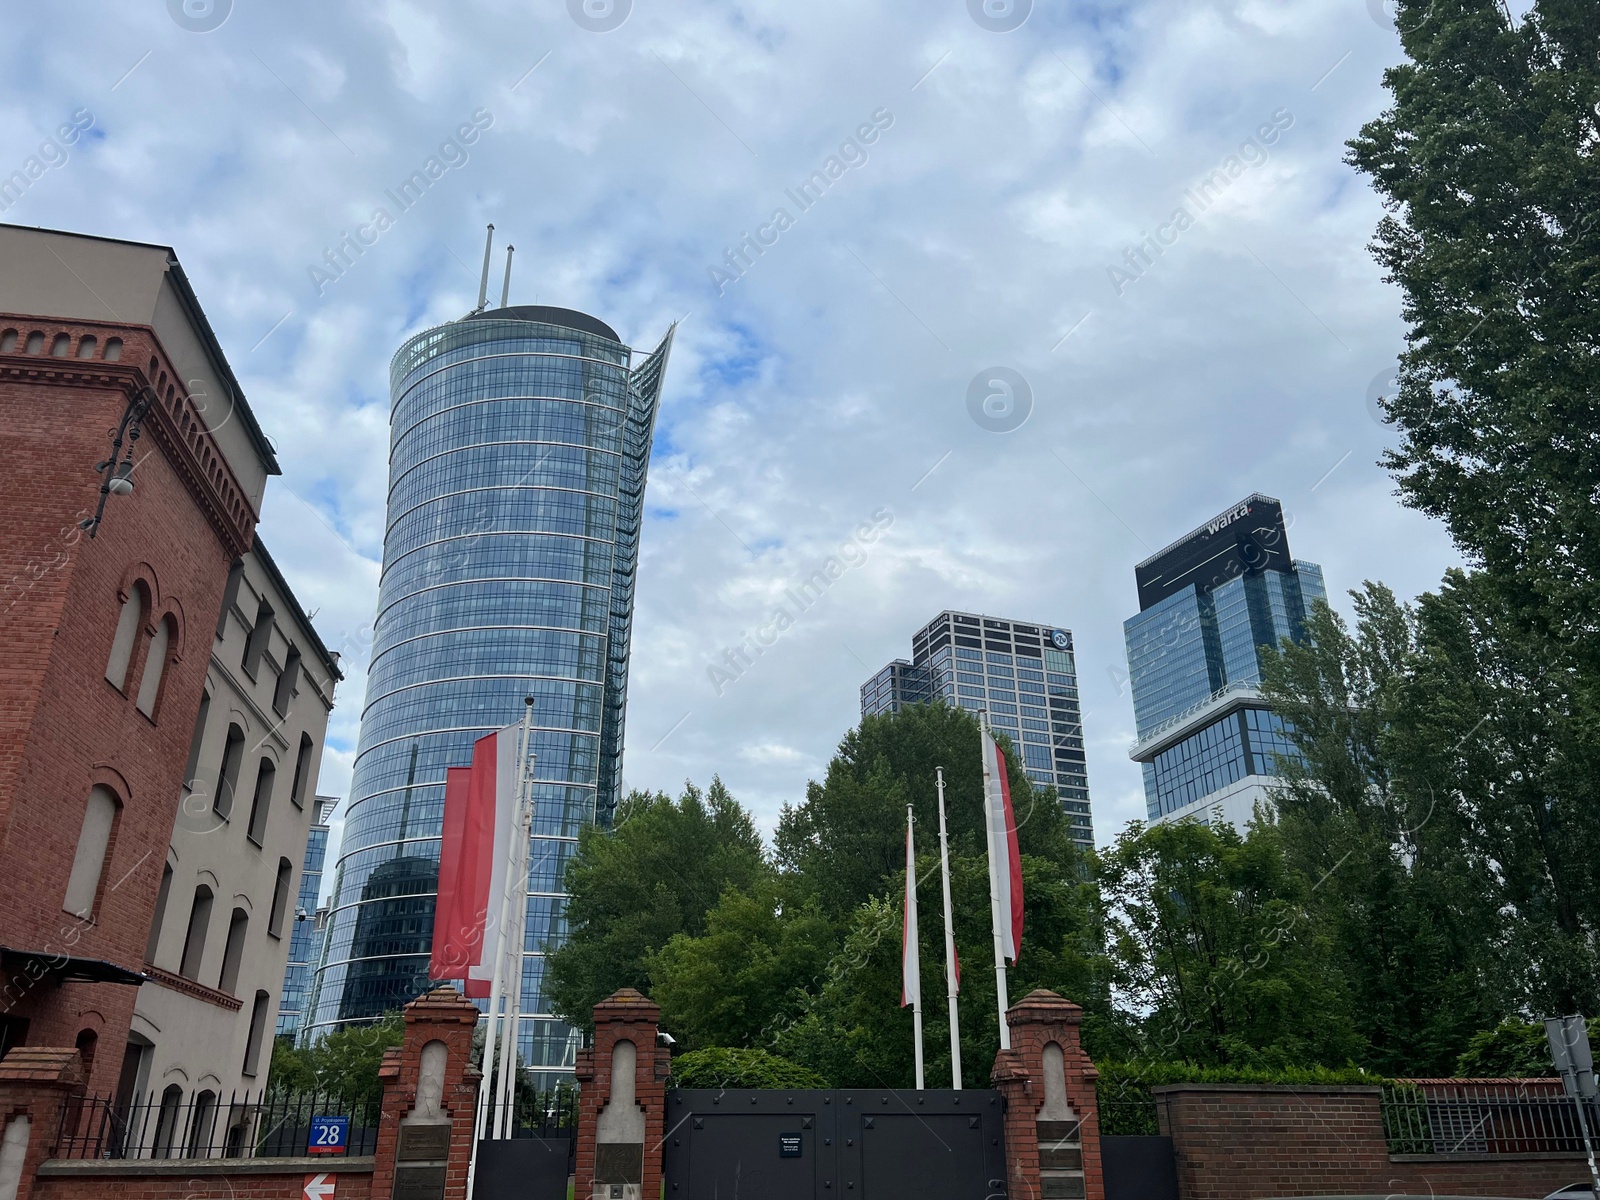 Photo of WARSAW, POLAND - JULY 13, 2022: Beautiful view of modern buildings on city street